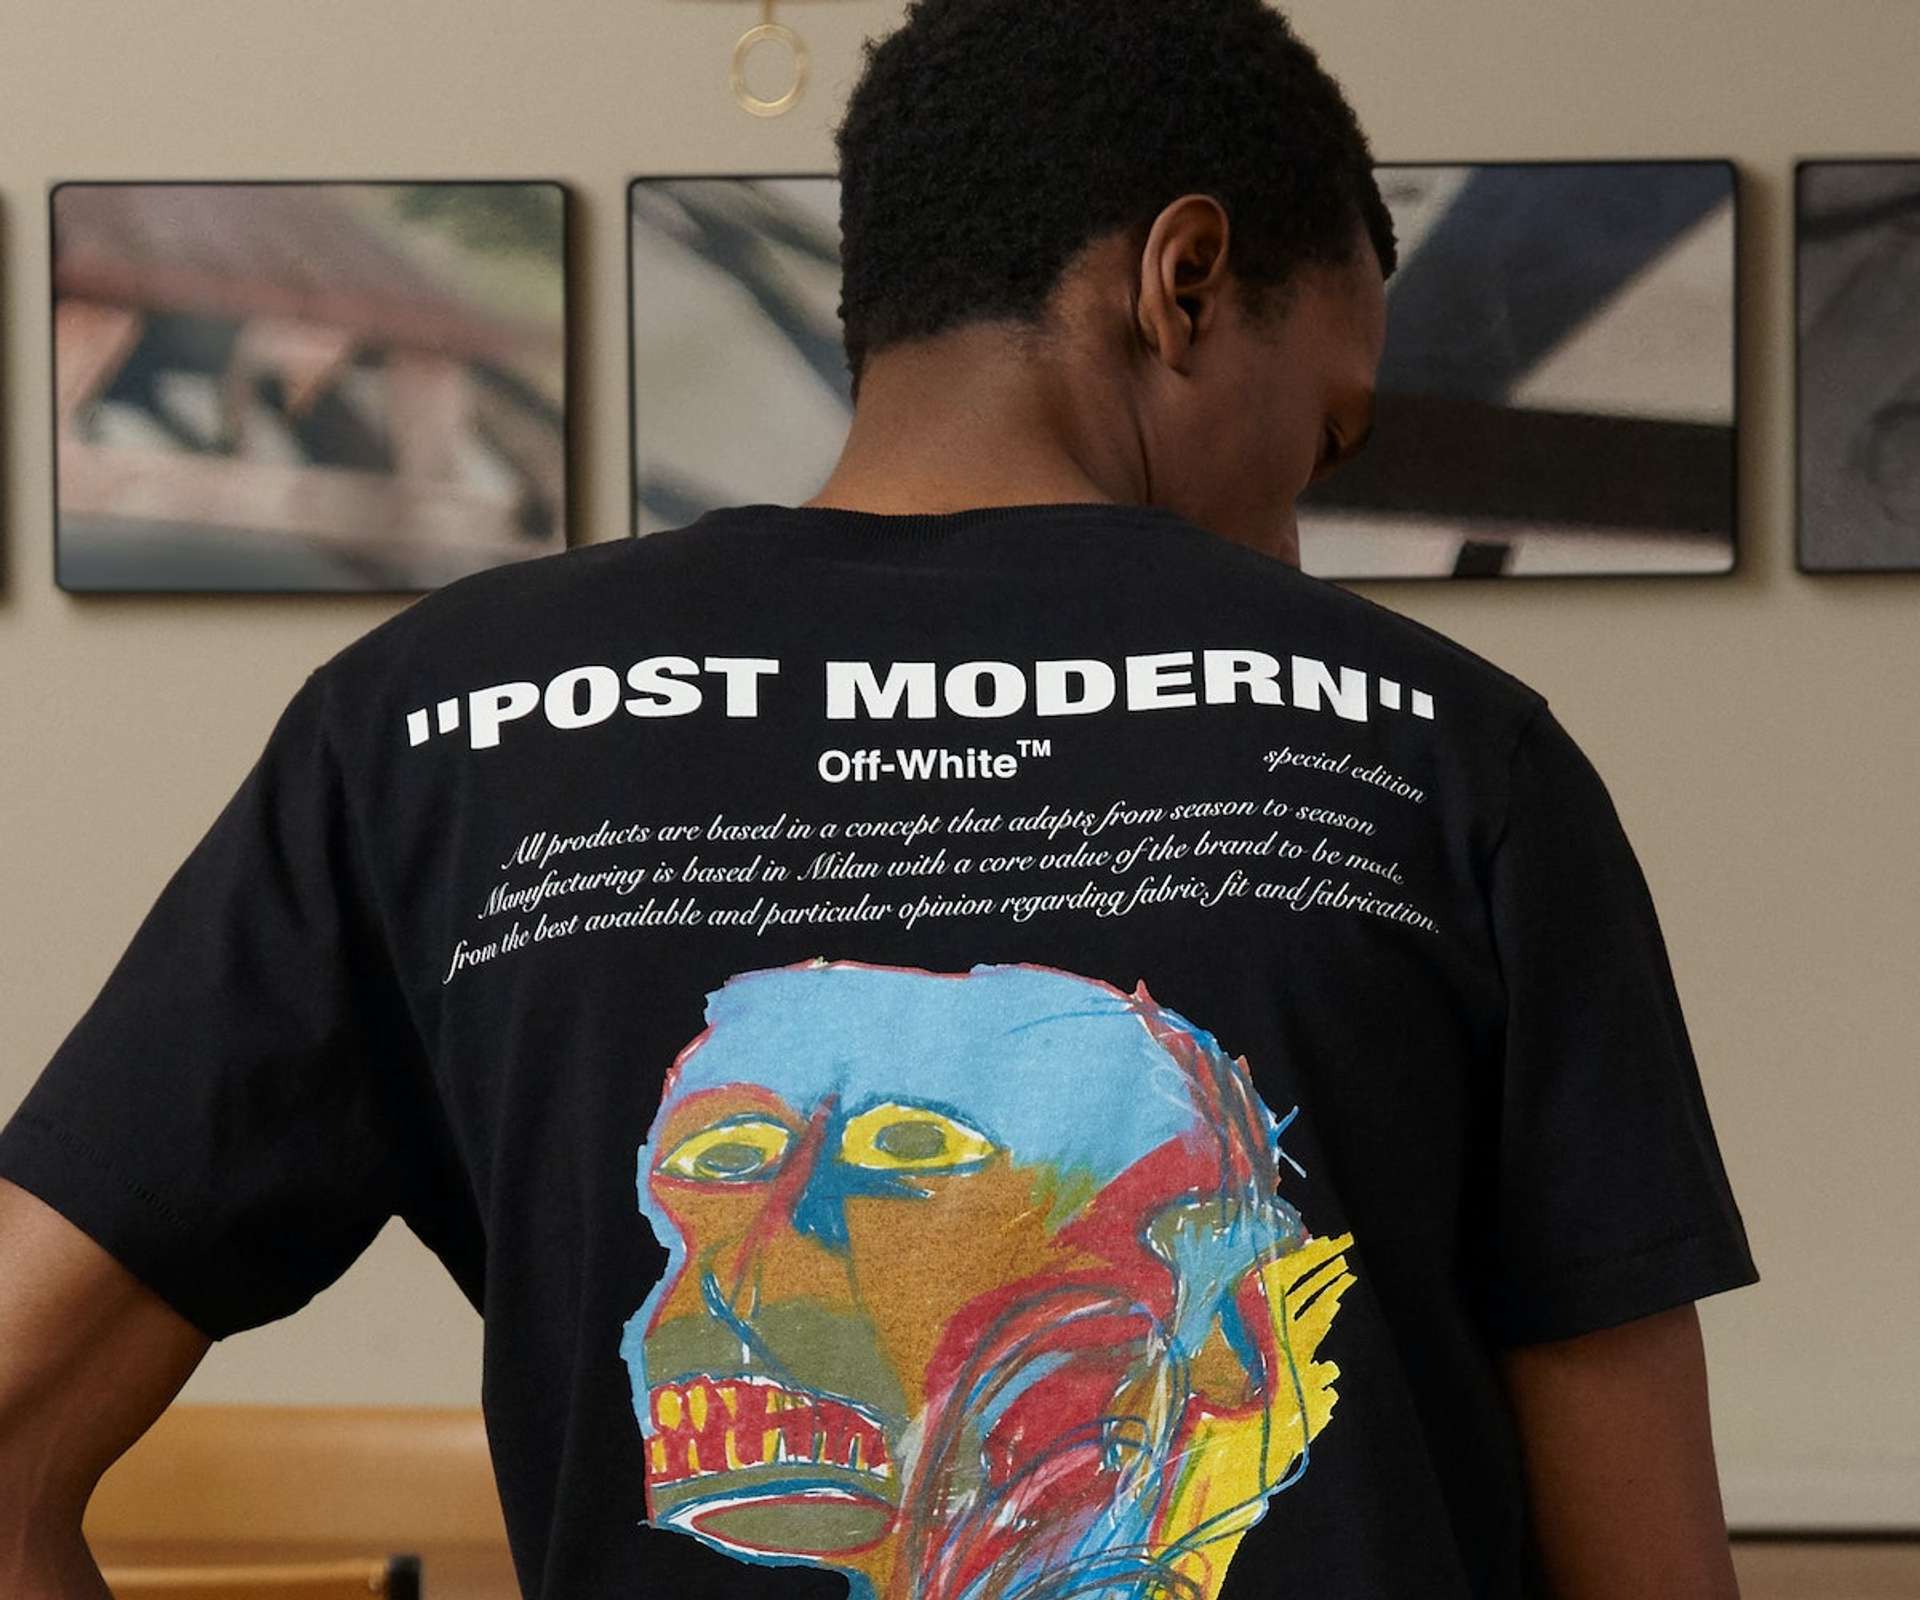 An image of a model wearing a T-shirt from the collaboration between “Off-White” and Basquiat.